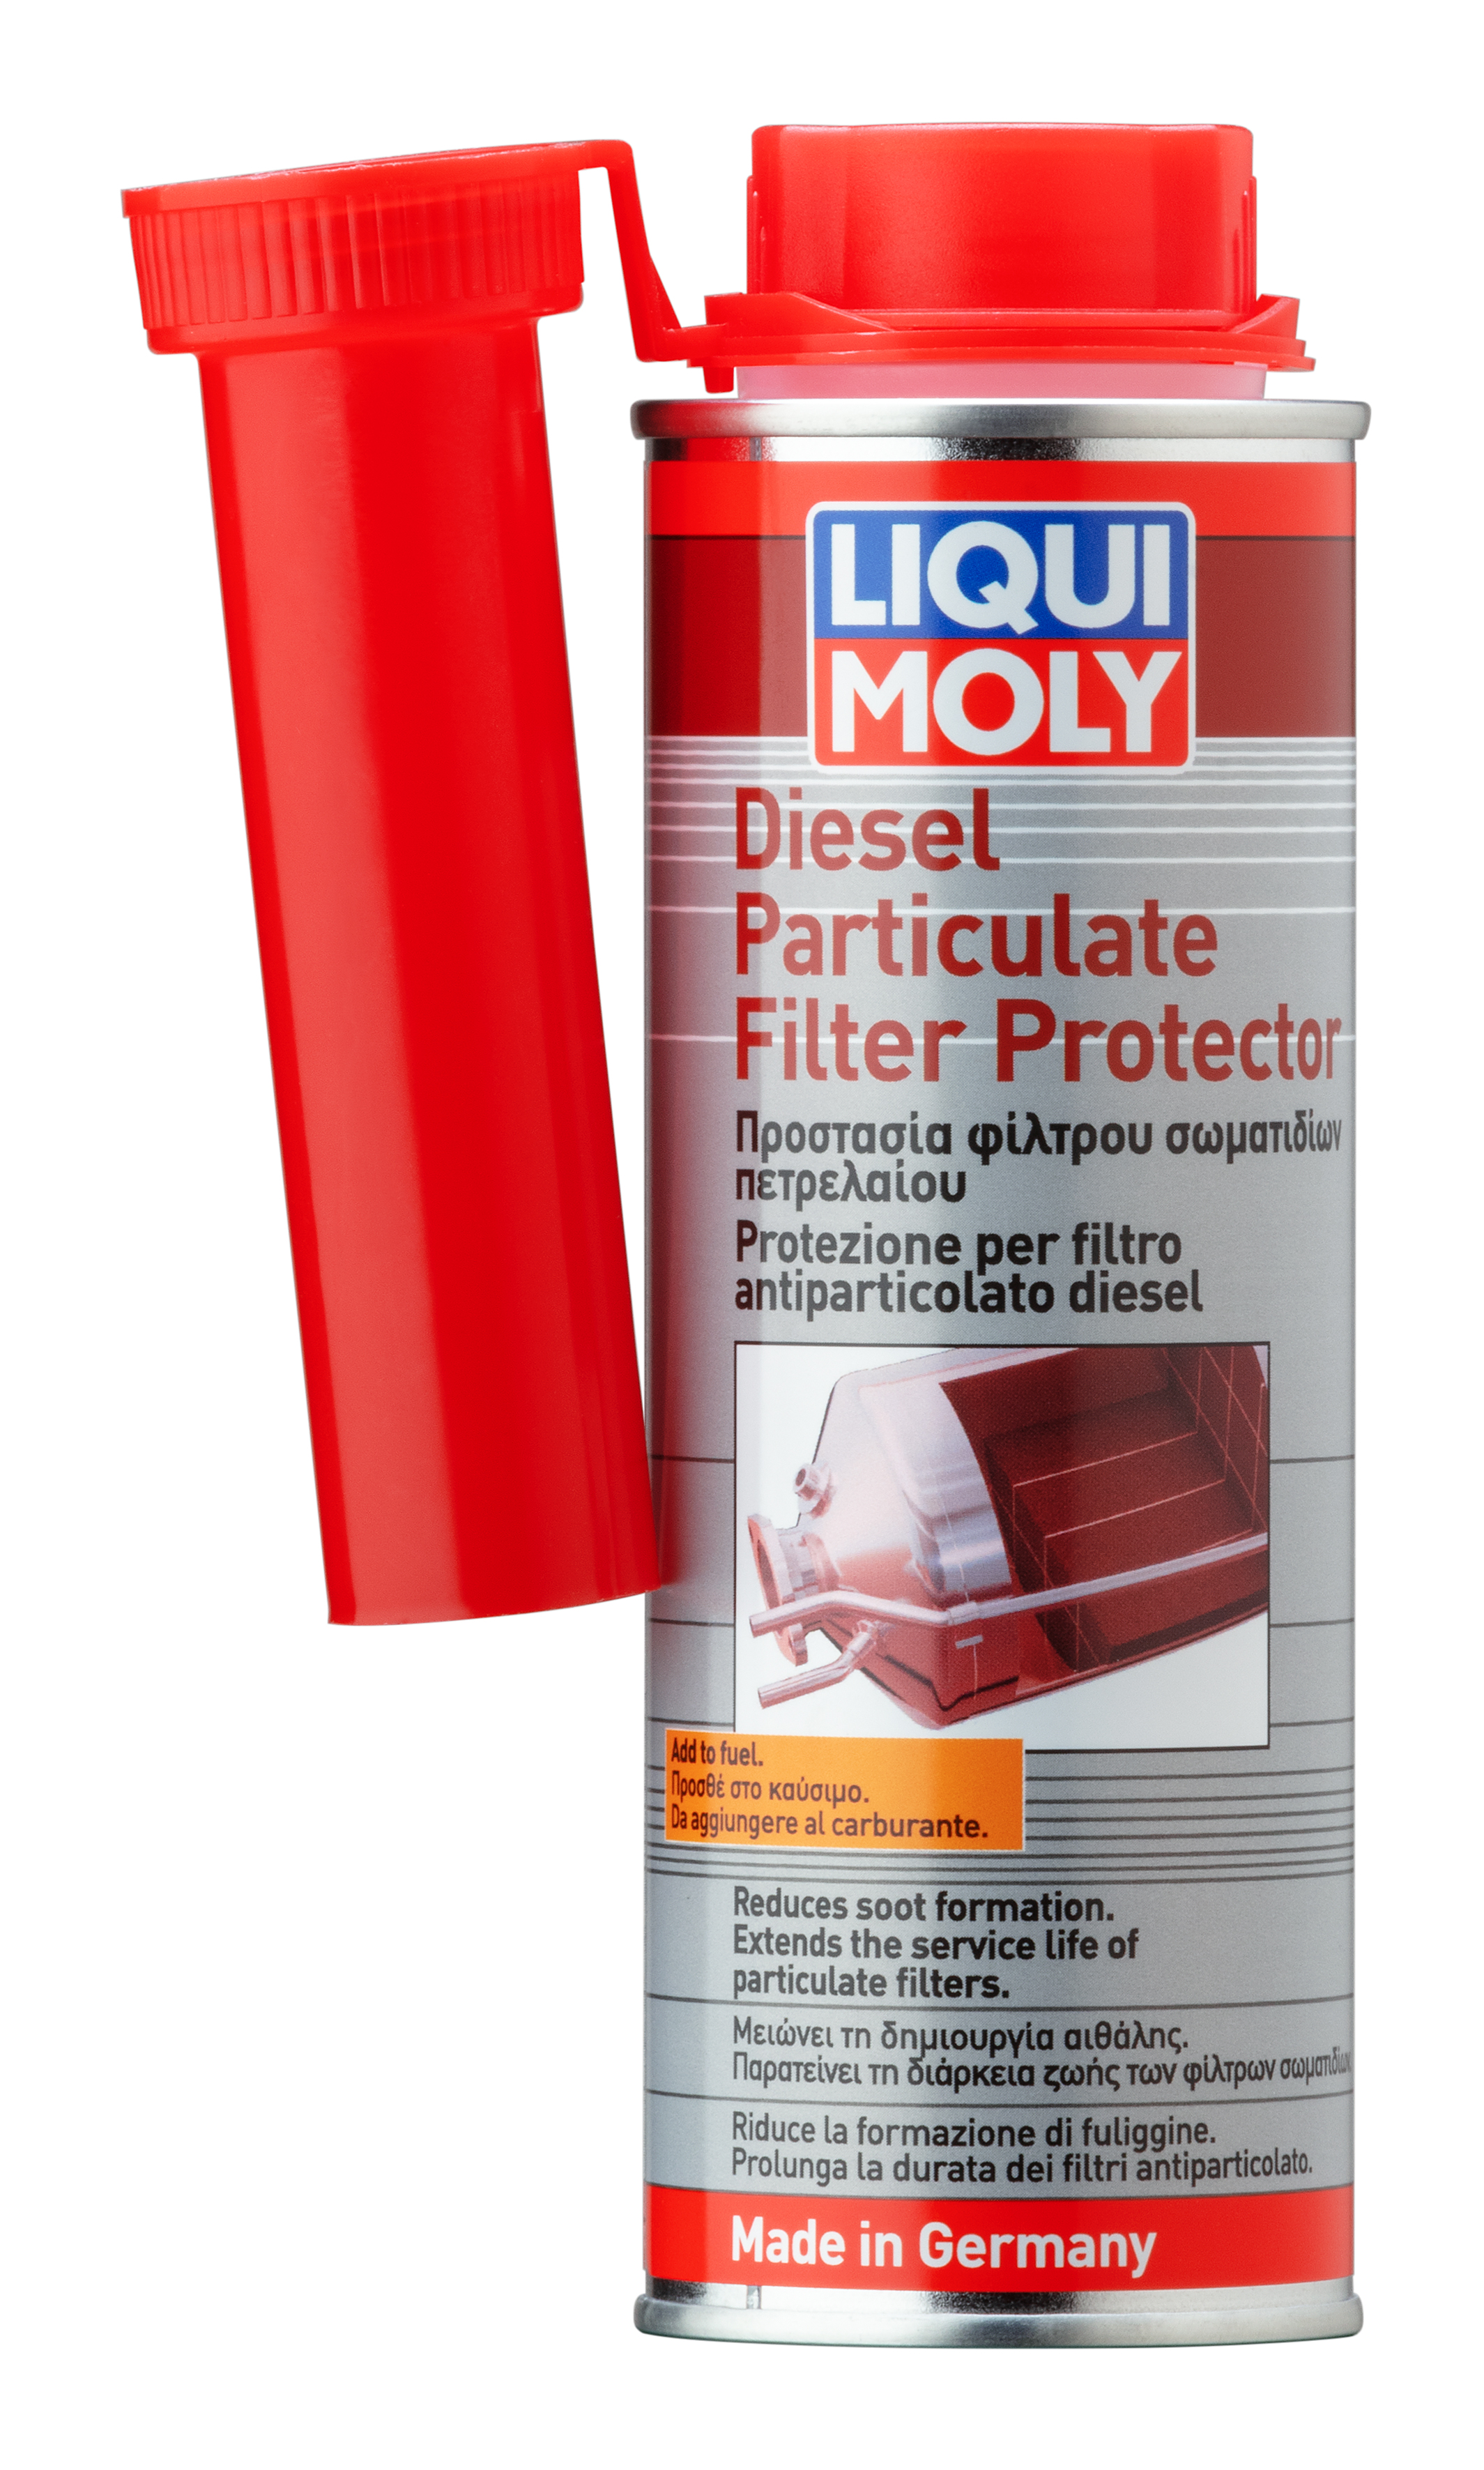 Diesel Particulate Filter Protector